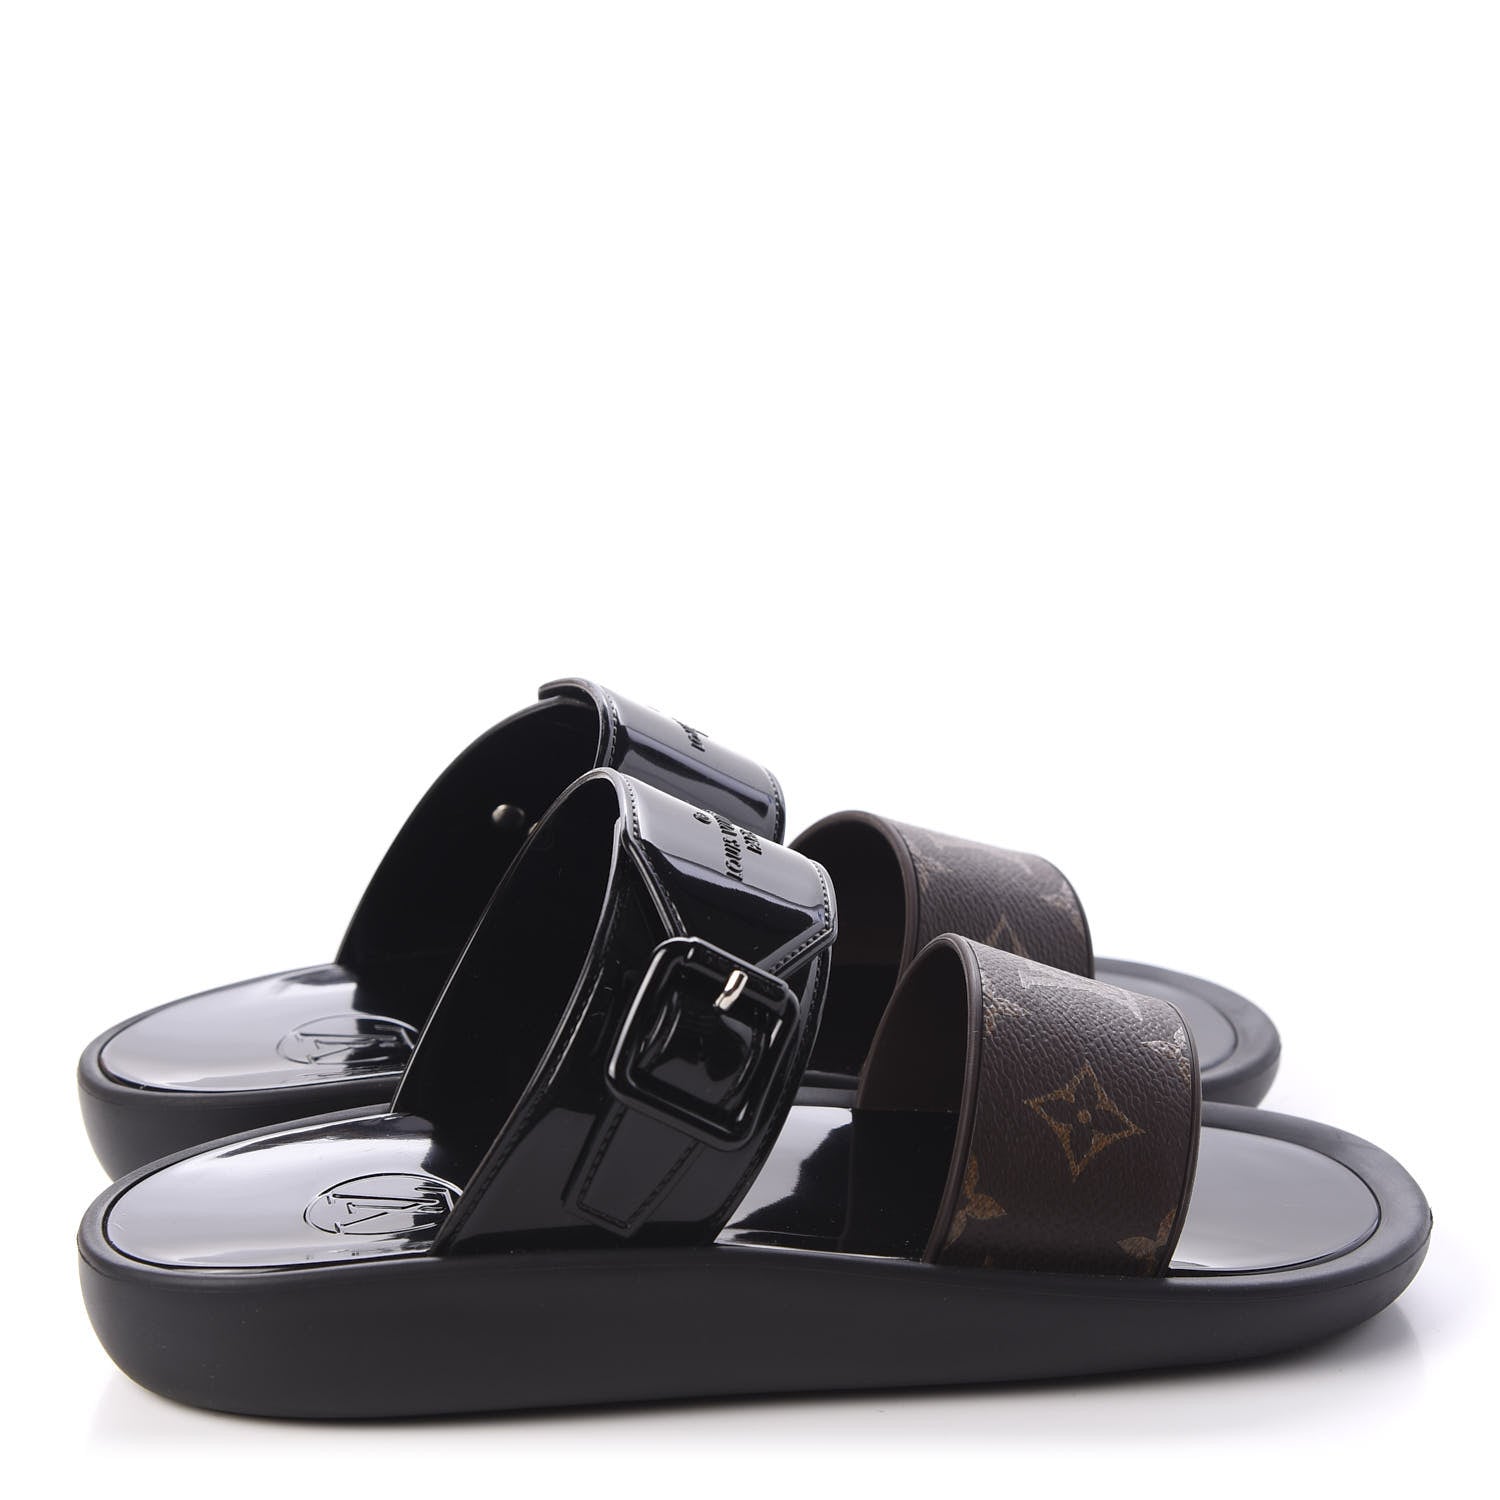 Louis Vuitton Black Feather Crystal Marilyn Flat Mule Sandals Size 4.5/35 -  Yoogi's Closet